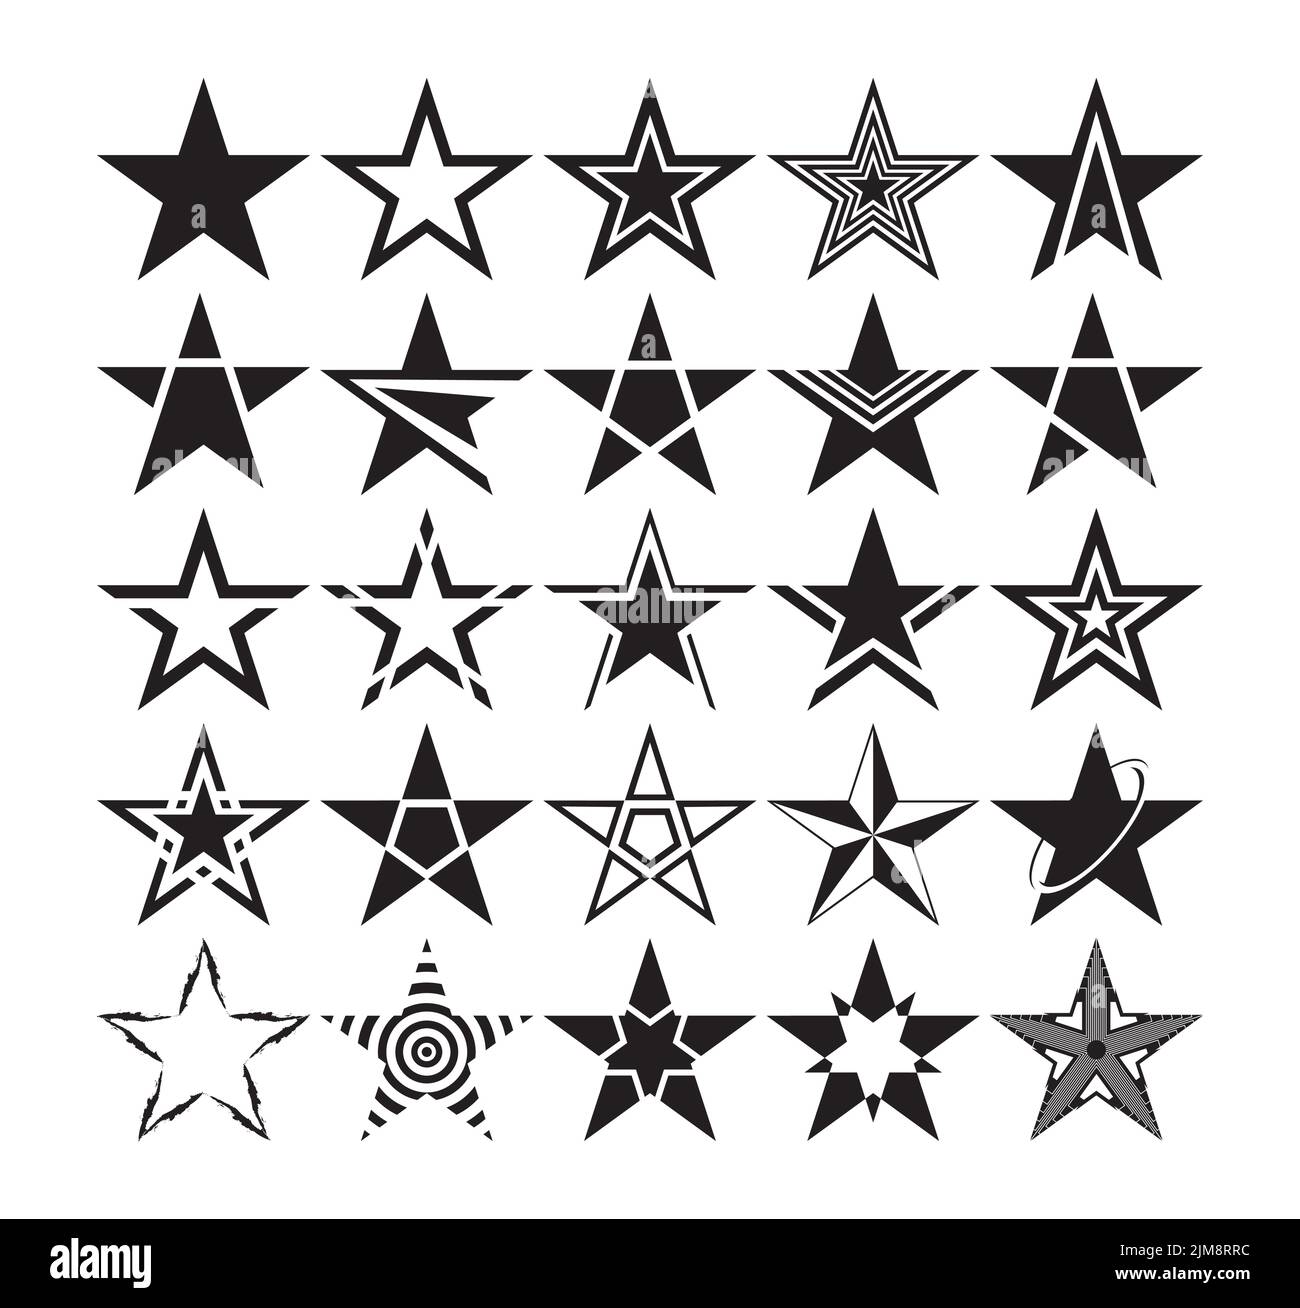 Set of star shape silhouettes. Different black star clipart drawings. Vector illustration Stock Vector